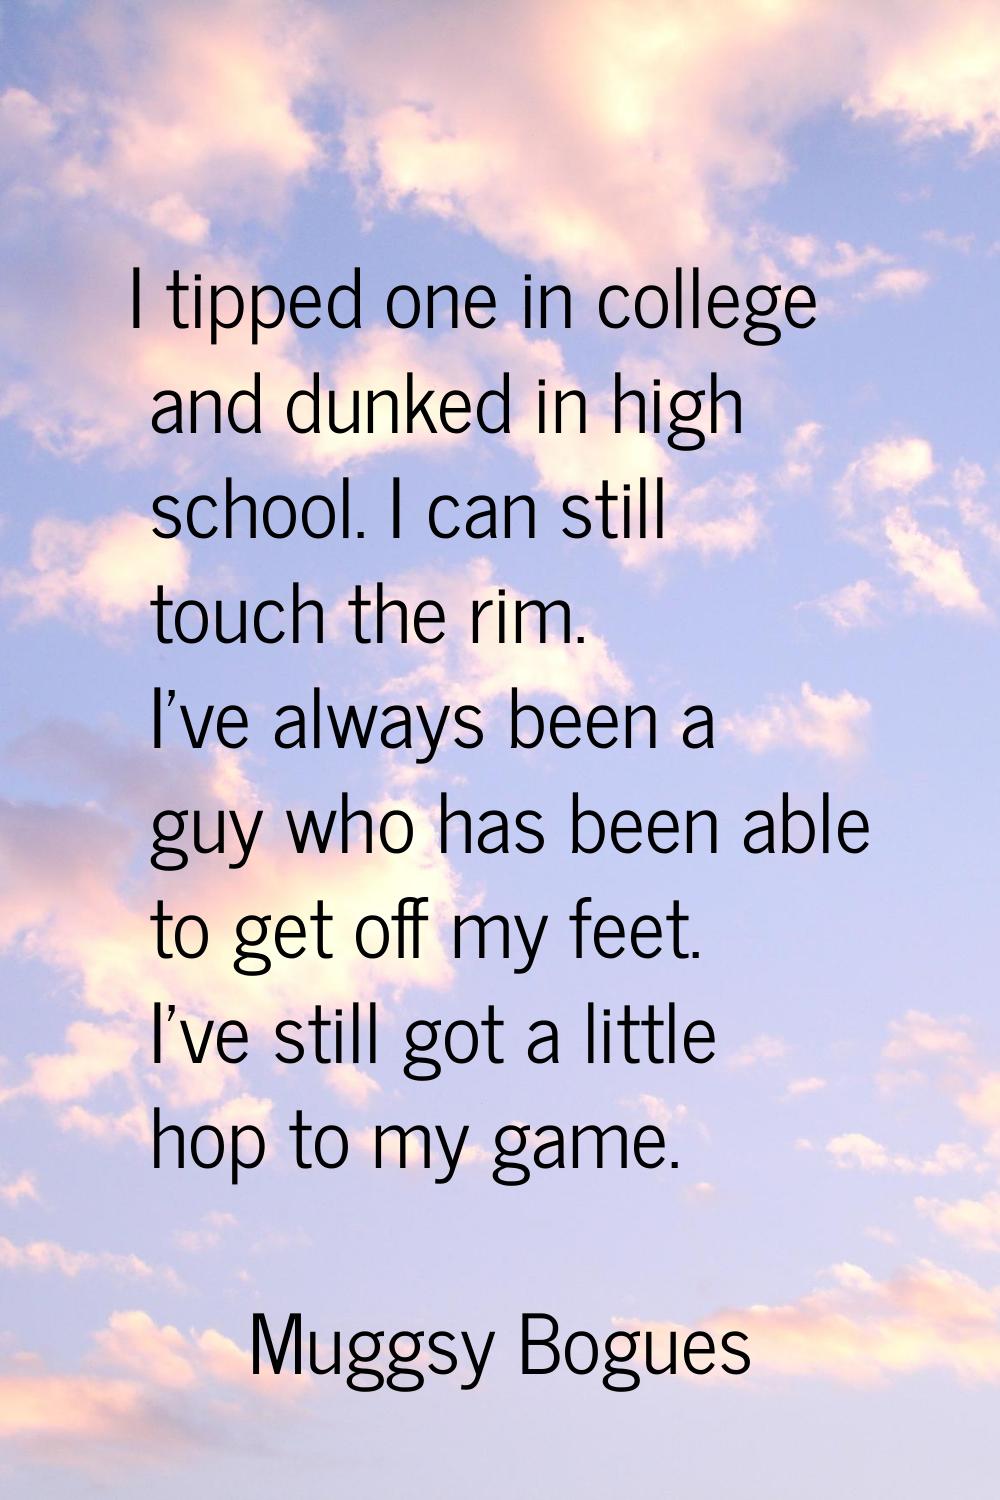 I tipped one in college and dunked in high school. I can still touch the rim. I've always been a gu